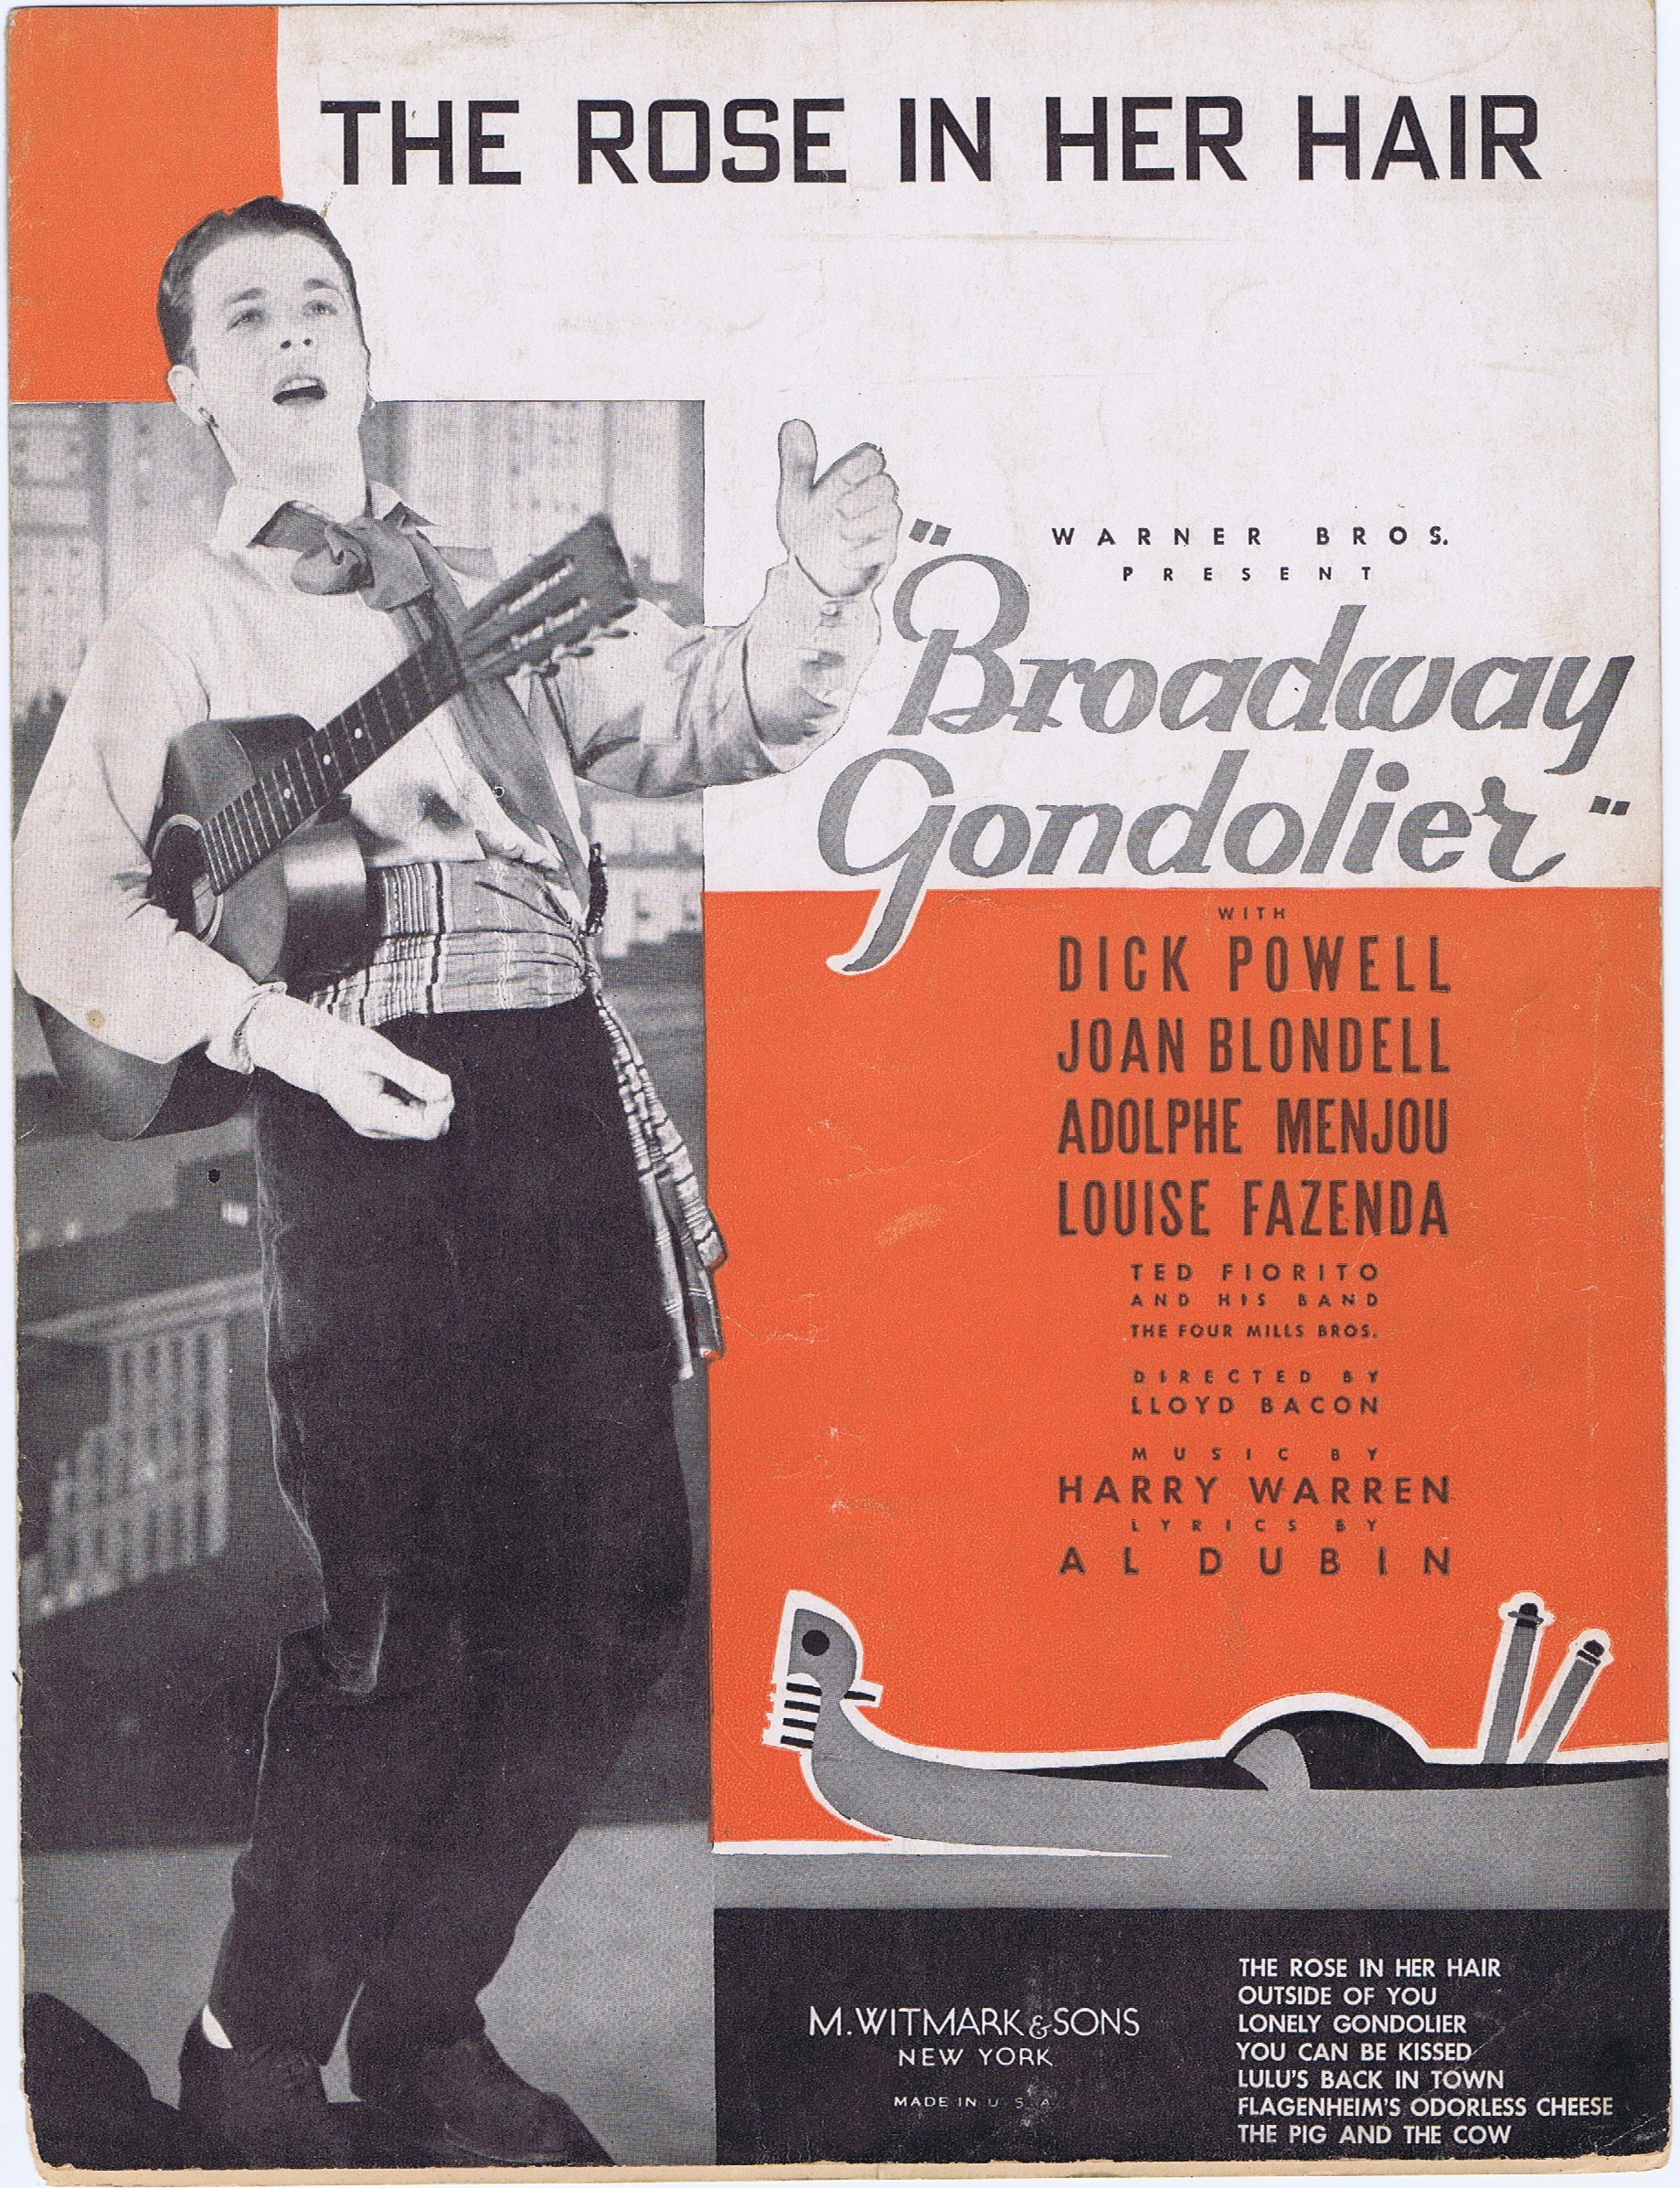 J189	 BROADWAY MELODY - THE ROSE IN HER HAIR”, “BROADWAY GONDOLIER”